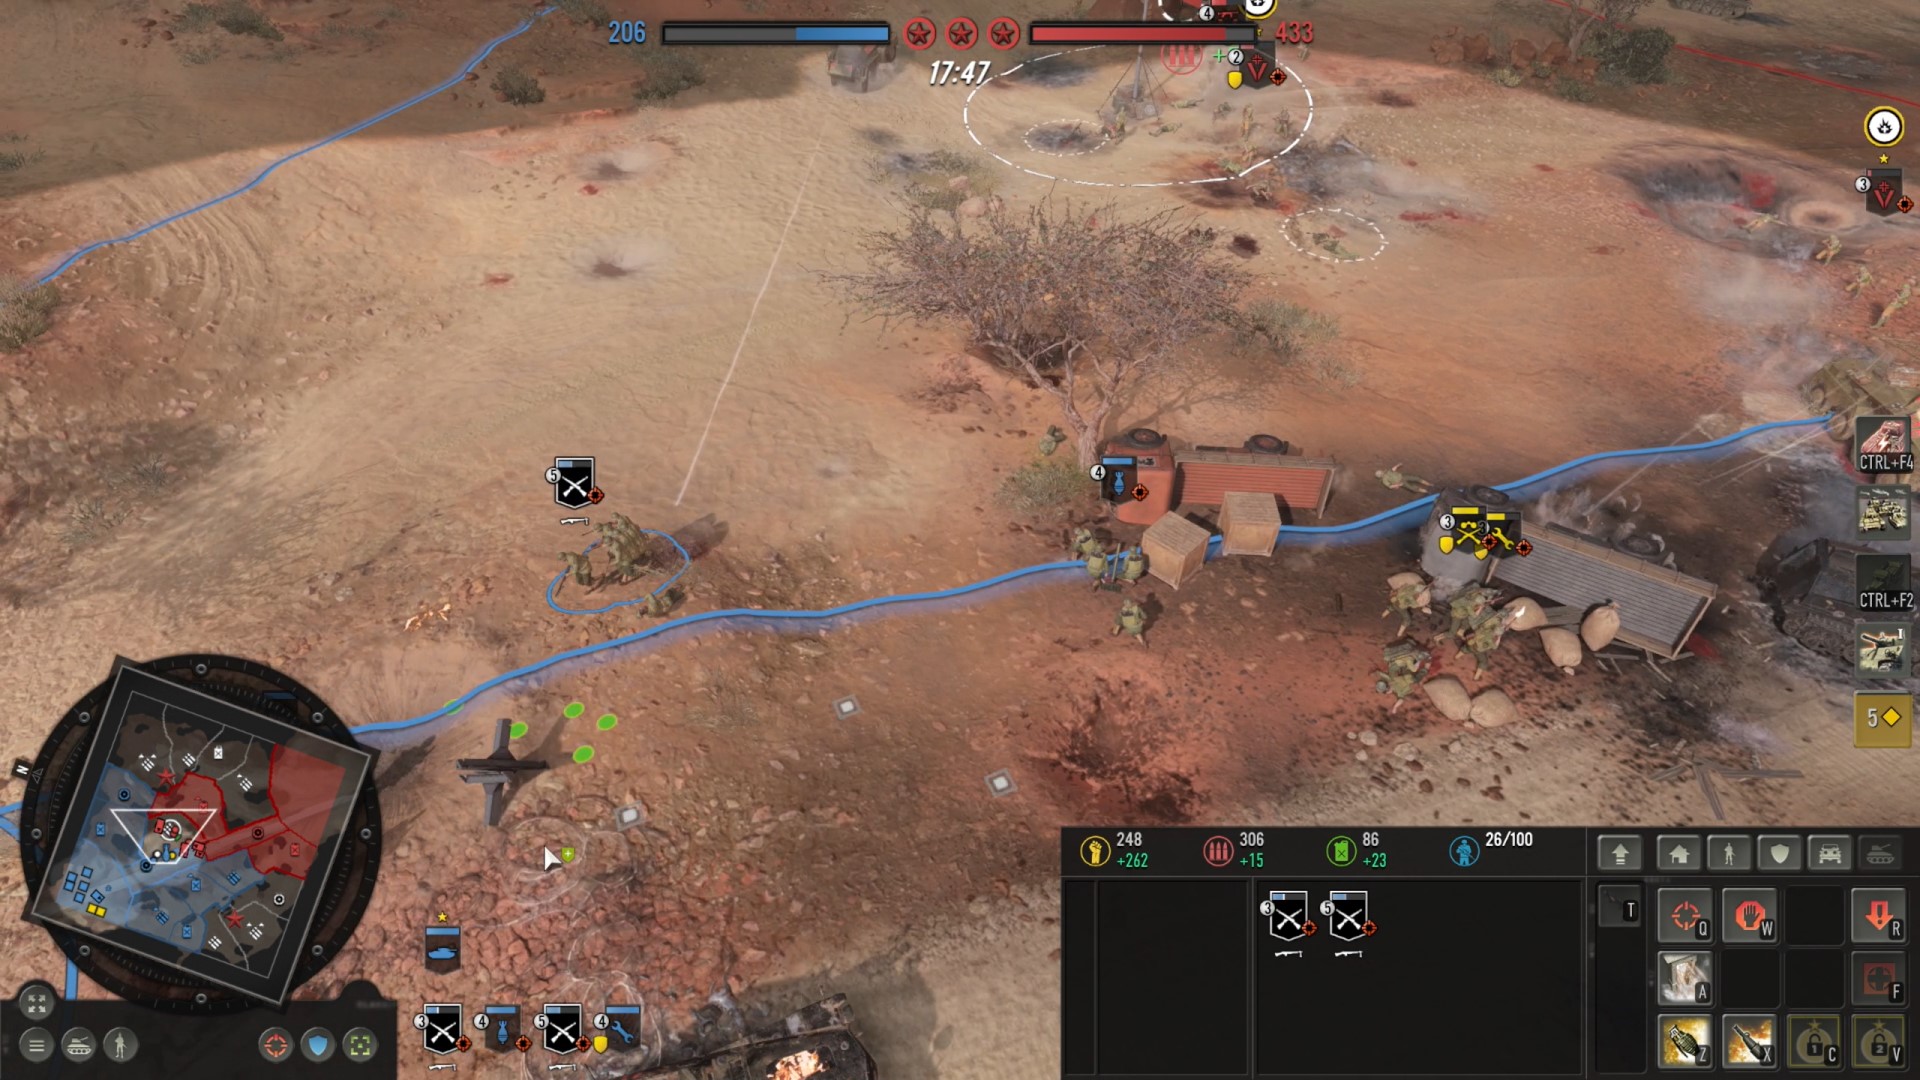 Company of heroes 3 - gameplay screenshot showing a pitched battle in the desert